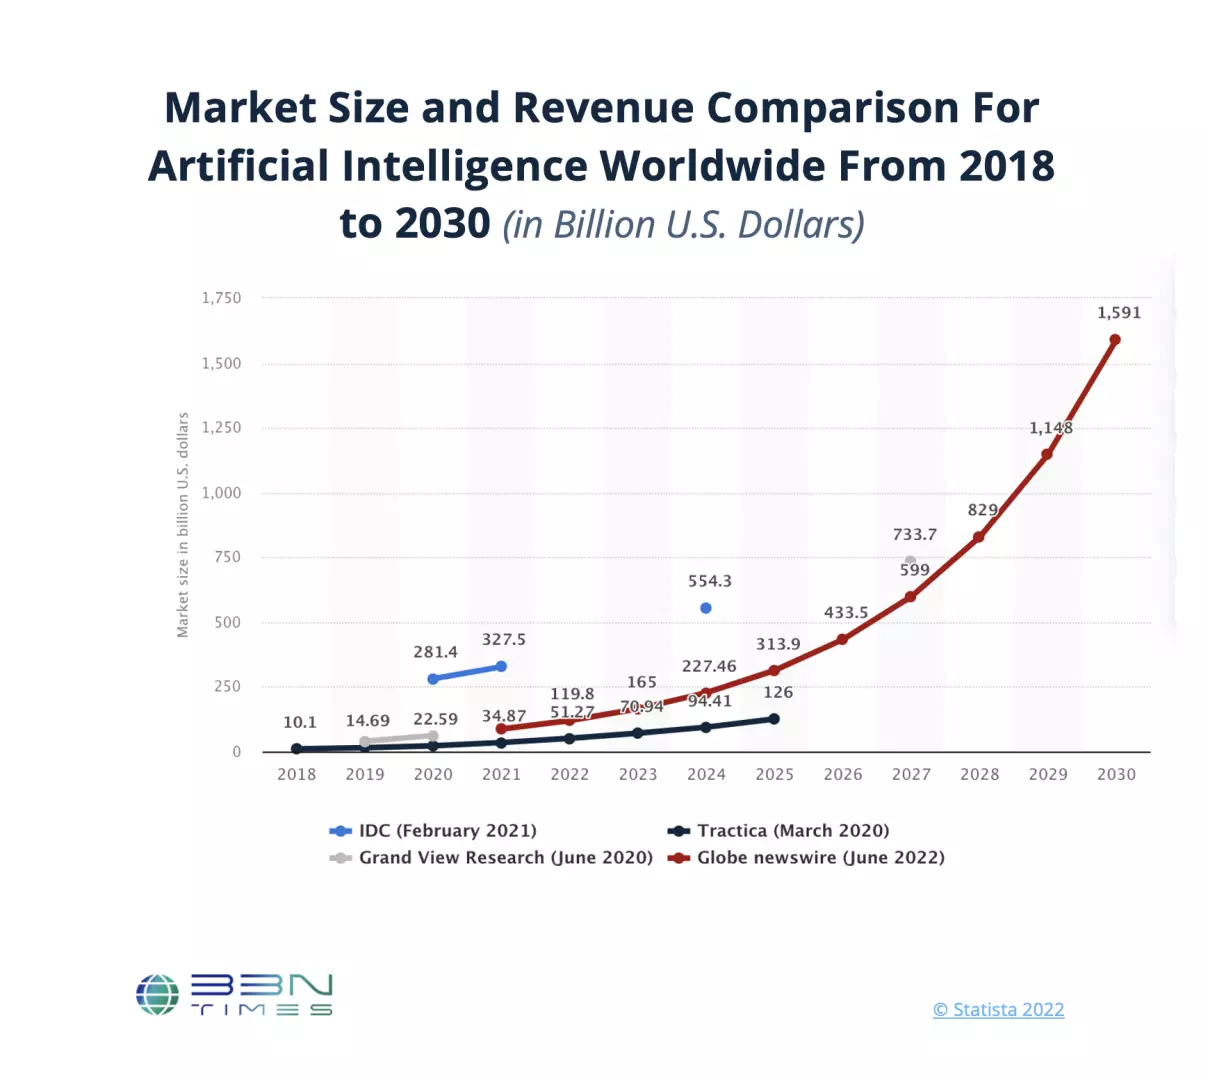 Market_Size_and_Revenue_Comparison_For_Artificial_Intelligence_Worldwide_From_2018_to_2030.png